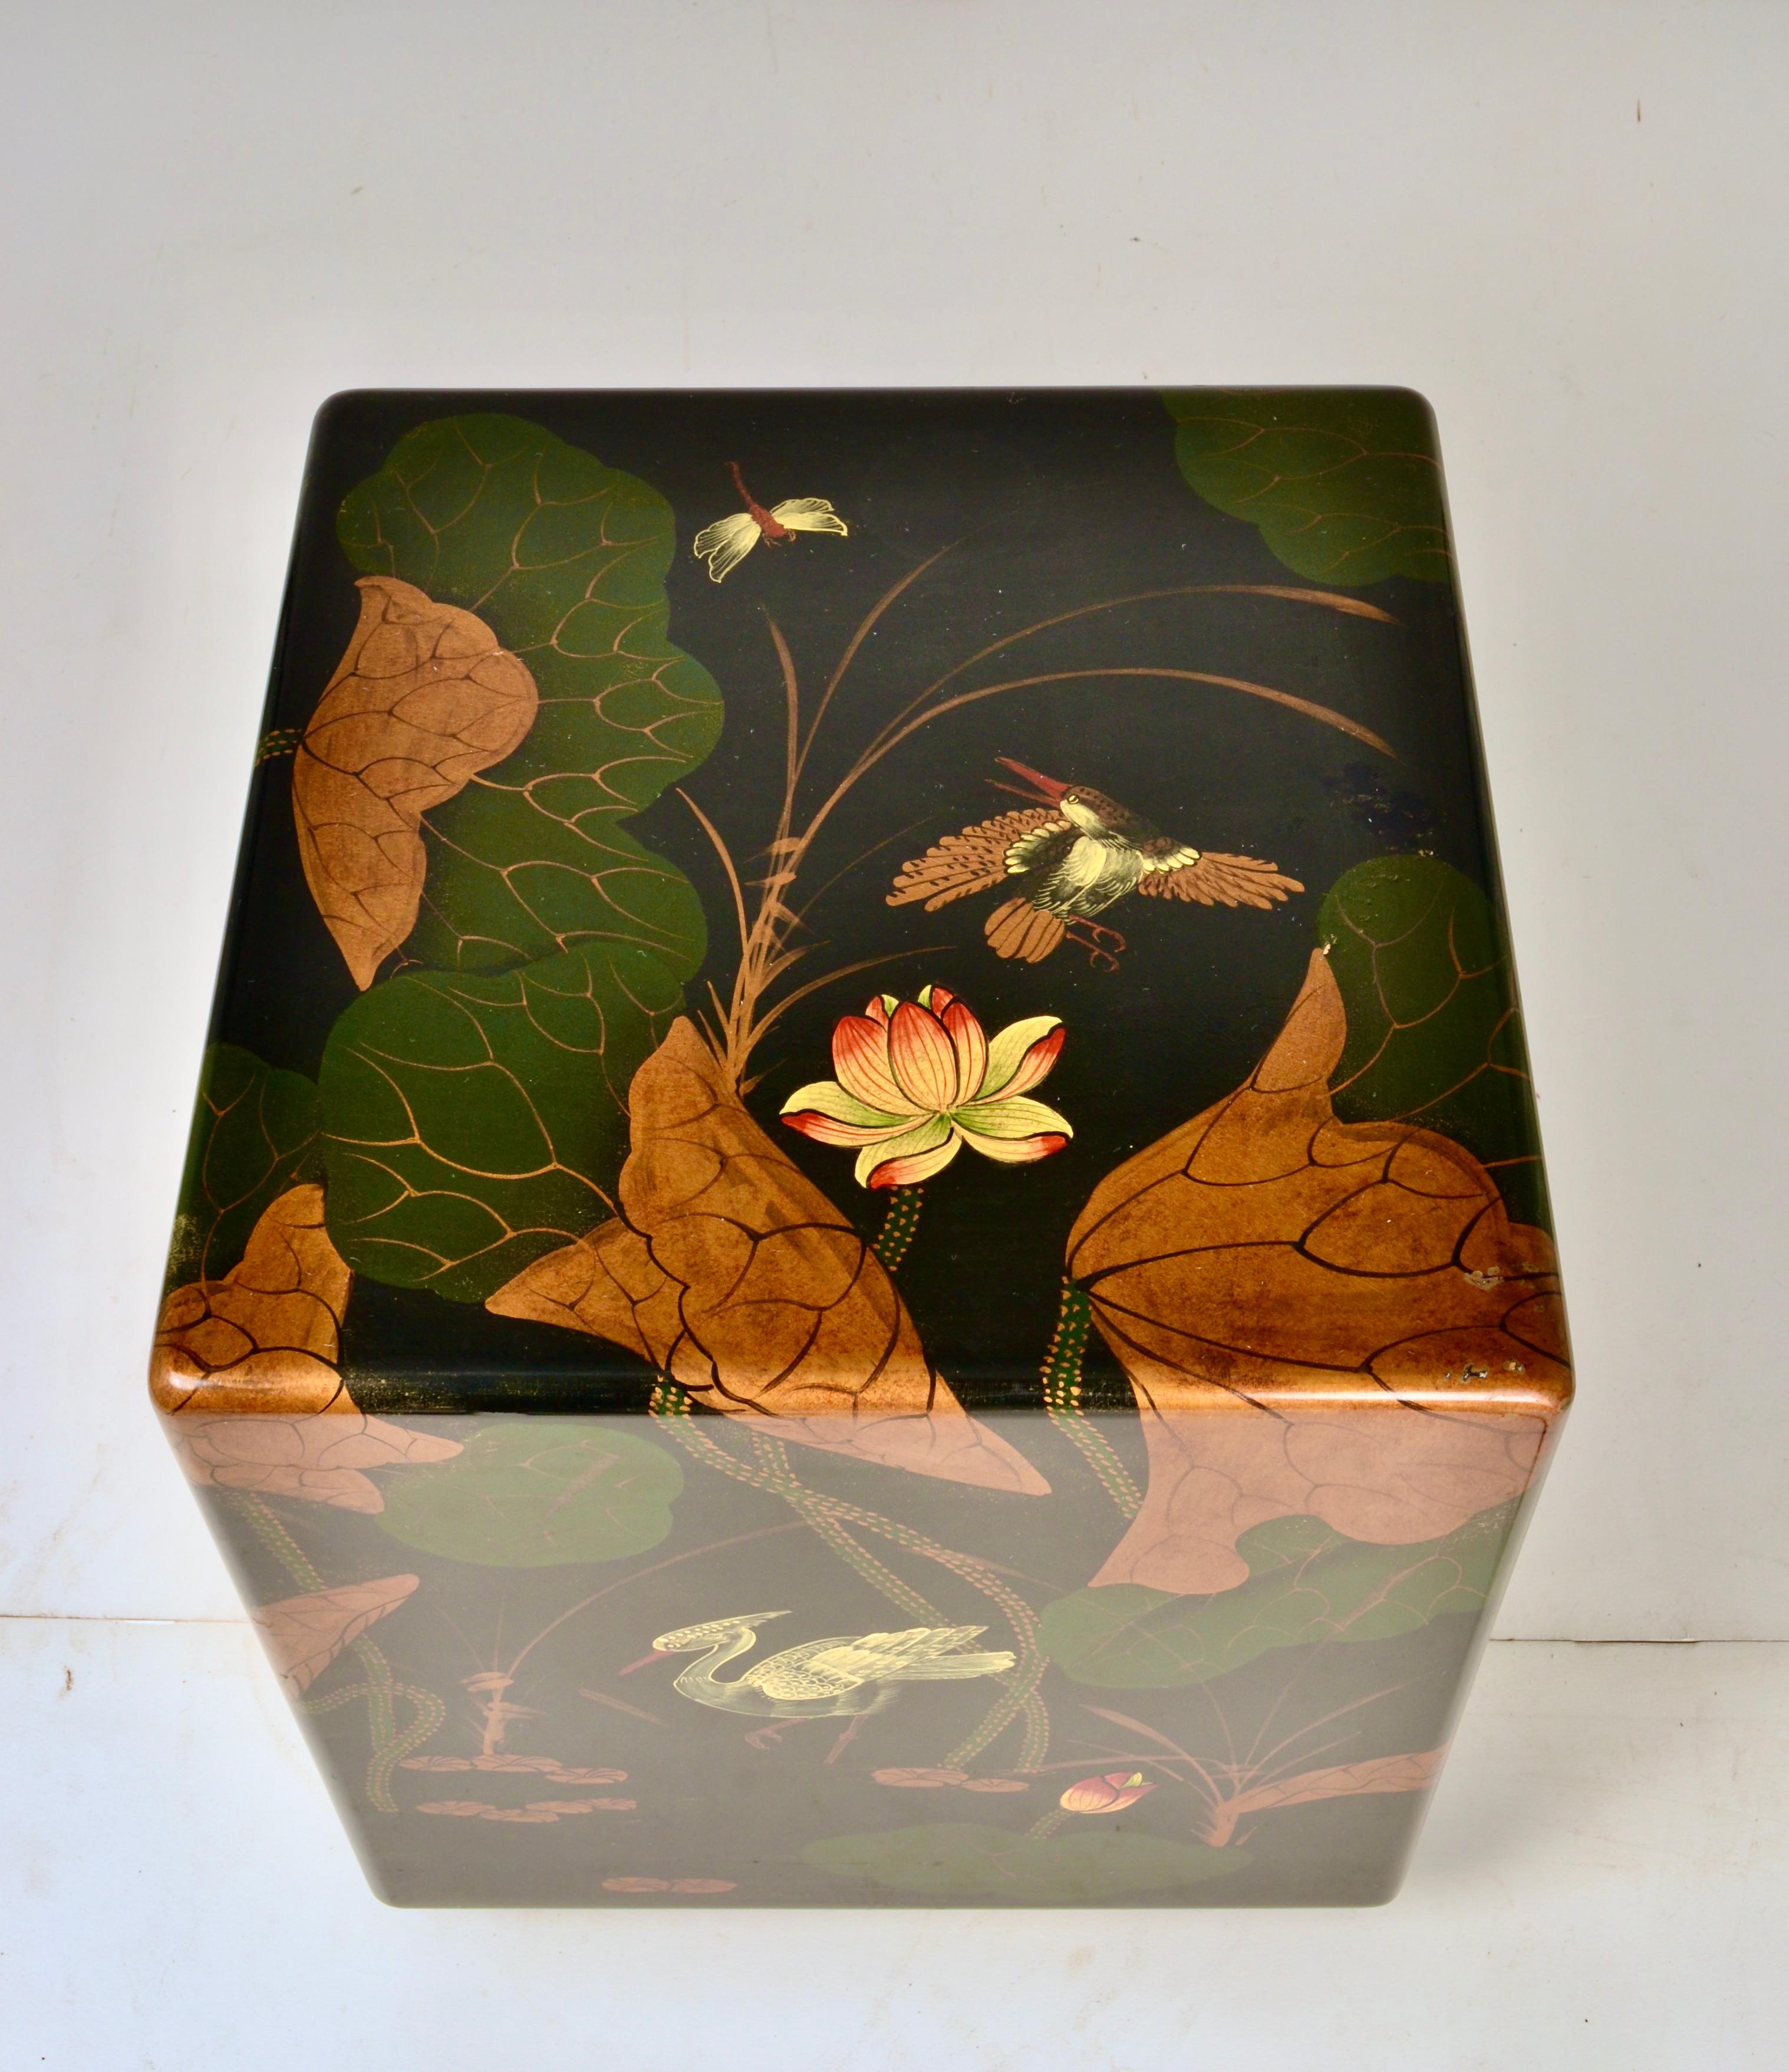 Striking chinoiserie decoration on this simple cube-form table. Great colors with gold touches. 